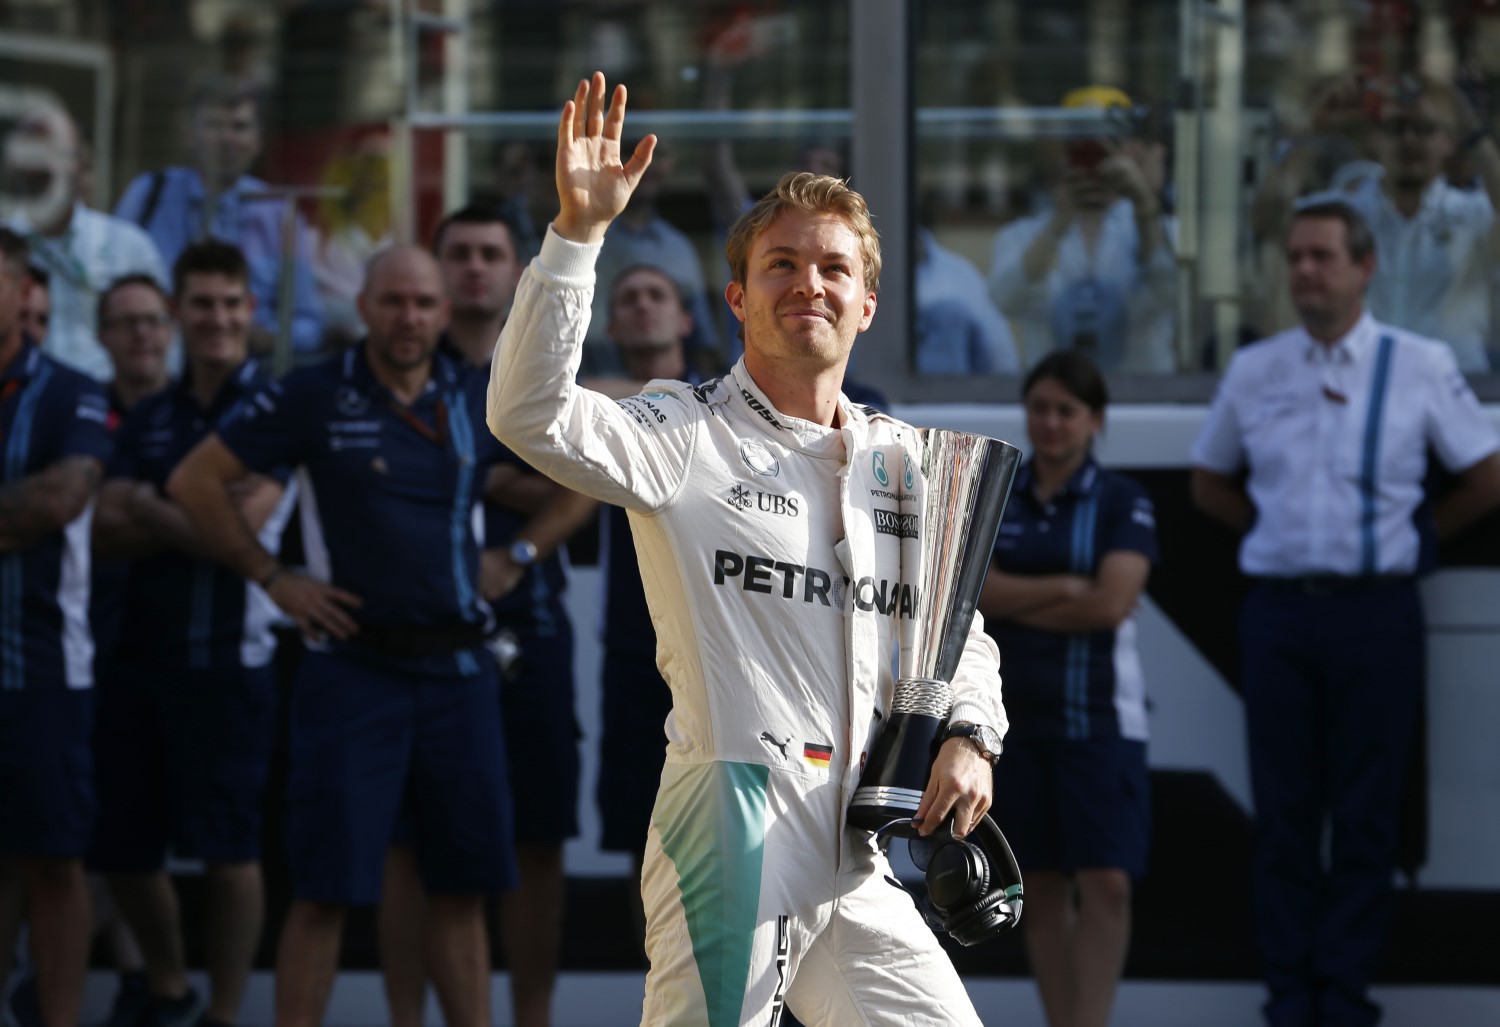 Rosberg won title then walked away from millions of dollars in sponsorship money as F1 champ